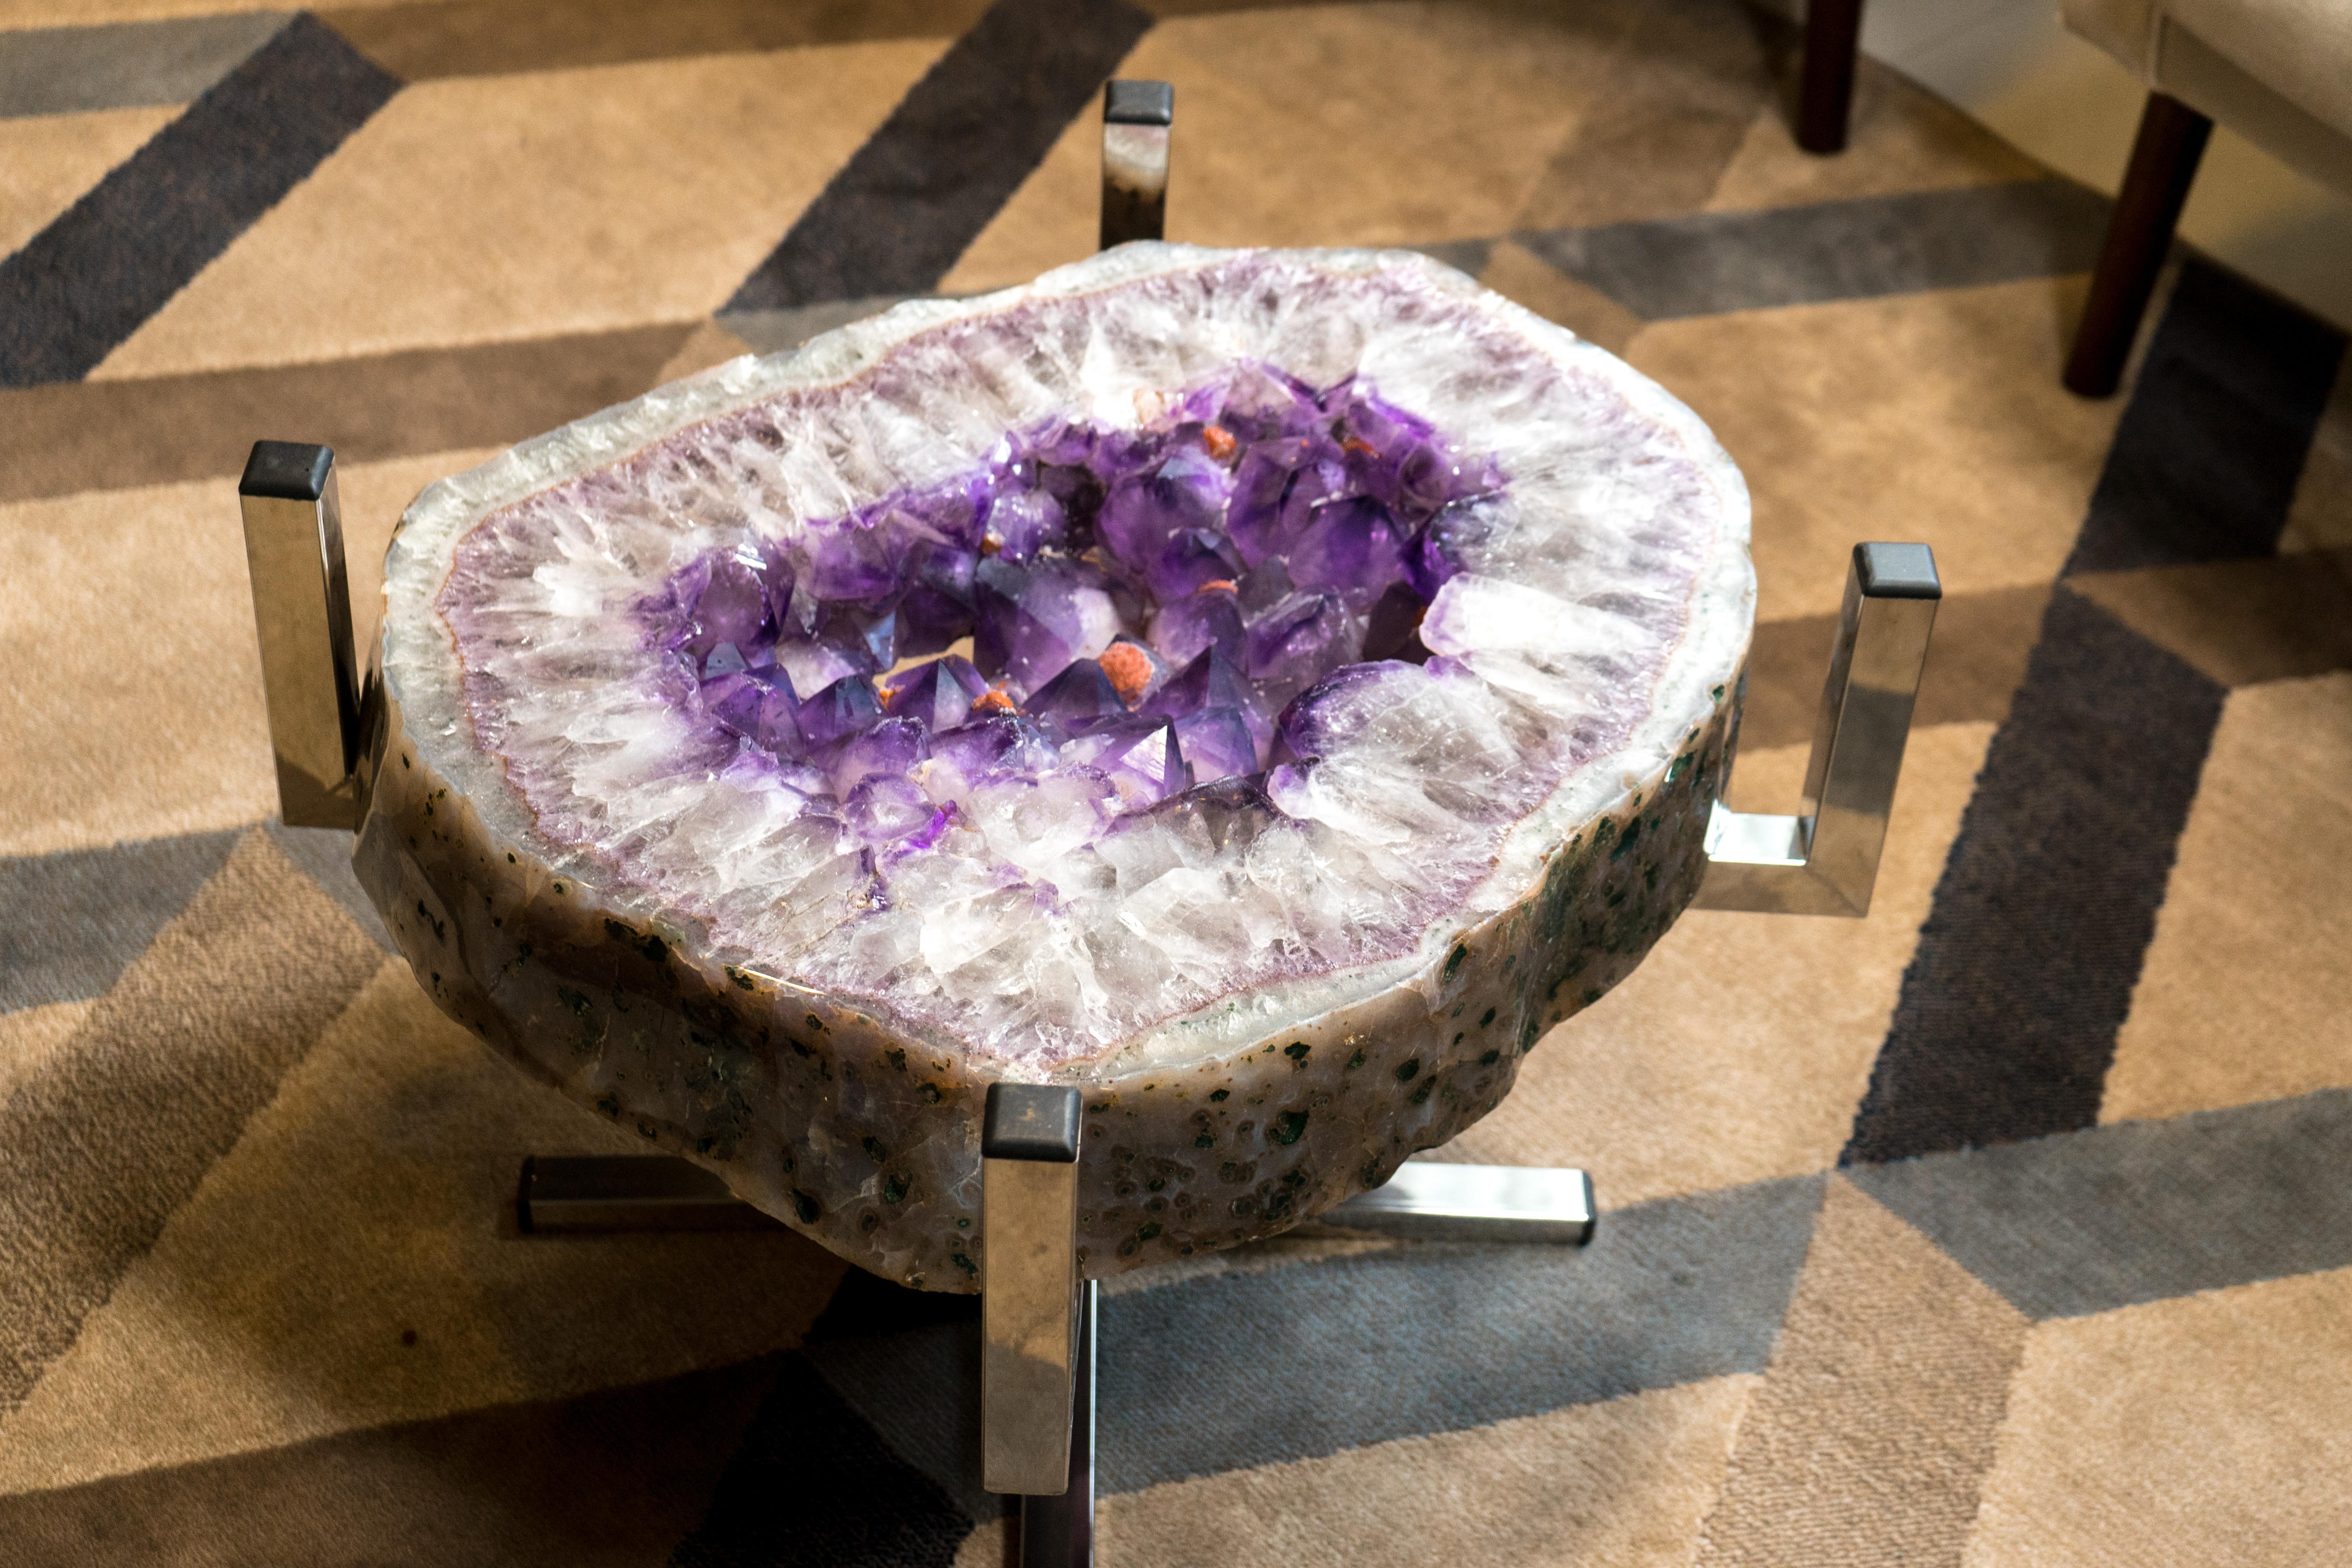 From a stunning Amethyst Geode with numerous unique characteristics, this Coffee Table is ready to become the central object of your home decor, and you can choose the place to add it, as a coffee or a side table.

The carefully selected geode